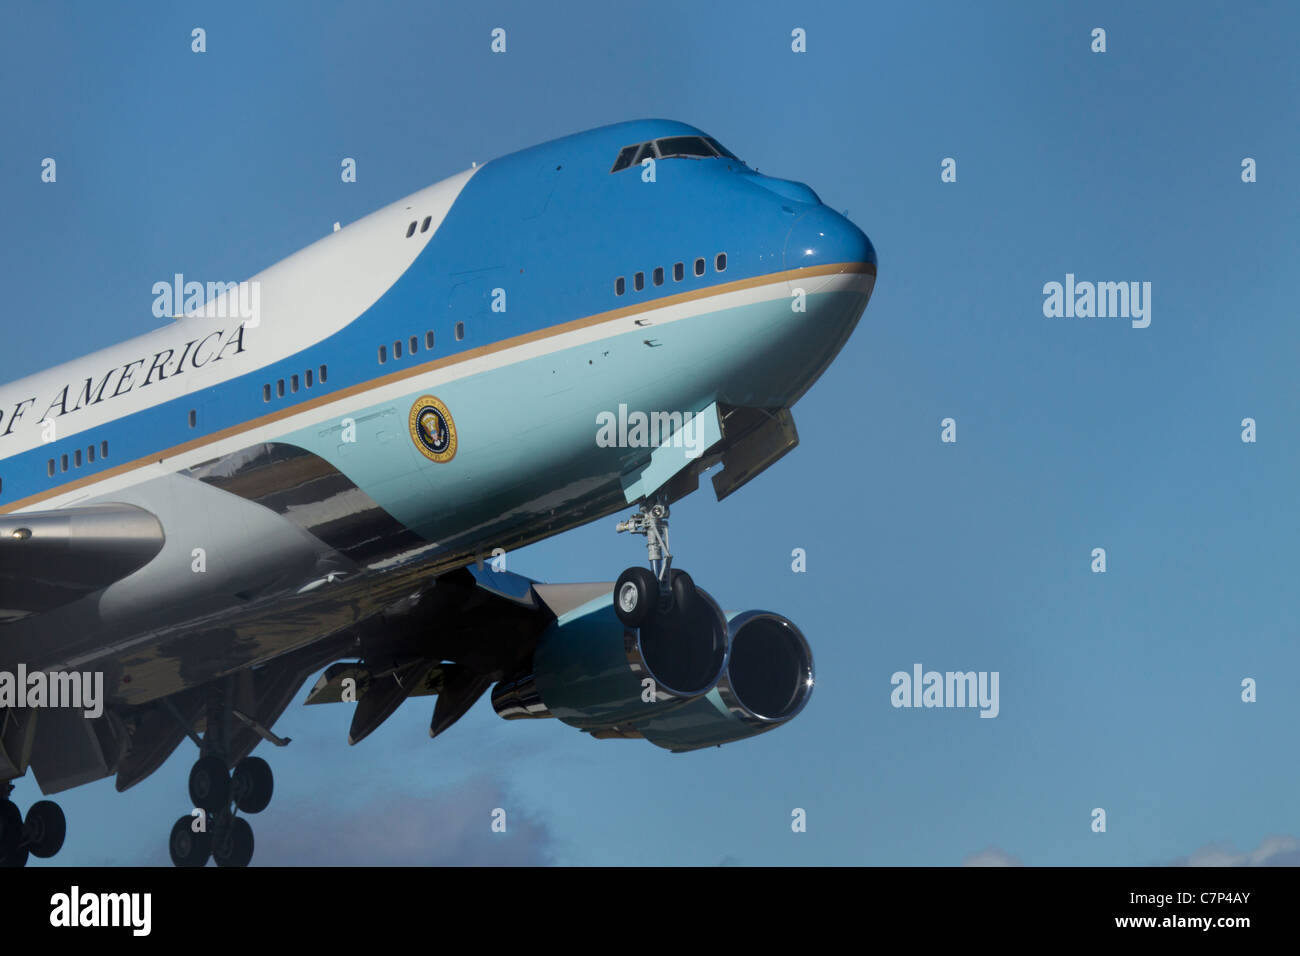 President Obama Departs from King County Airport/Boeing Field, Seattle, Washington on Air Force One, September 25, 2011 Stock Photo